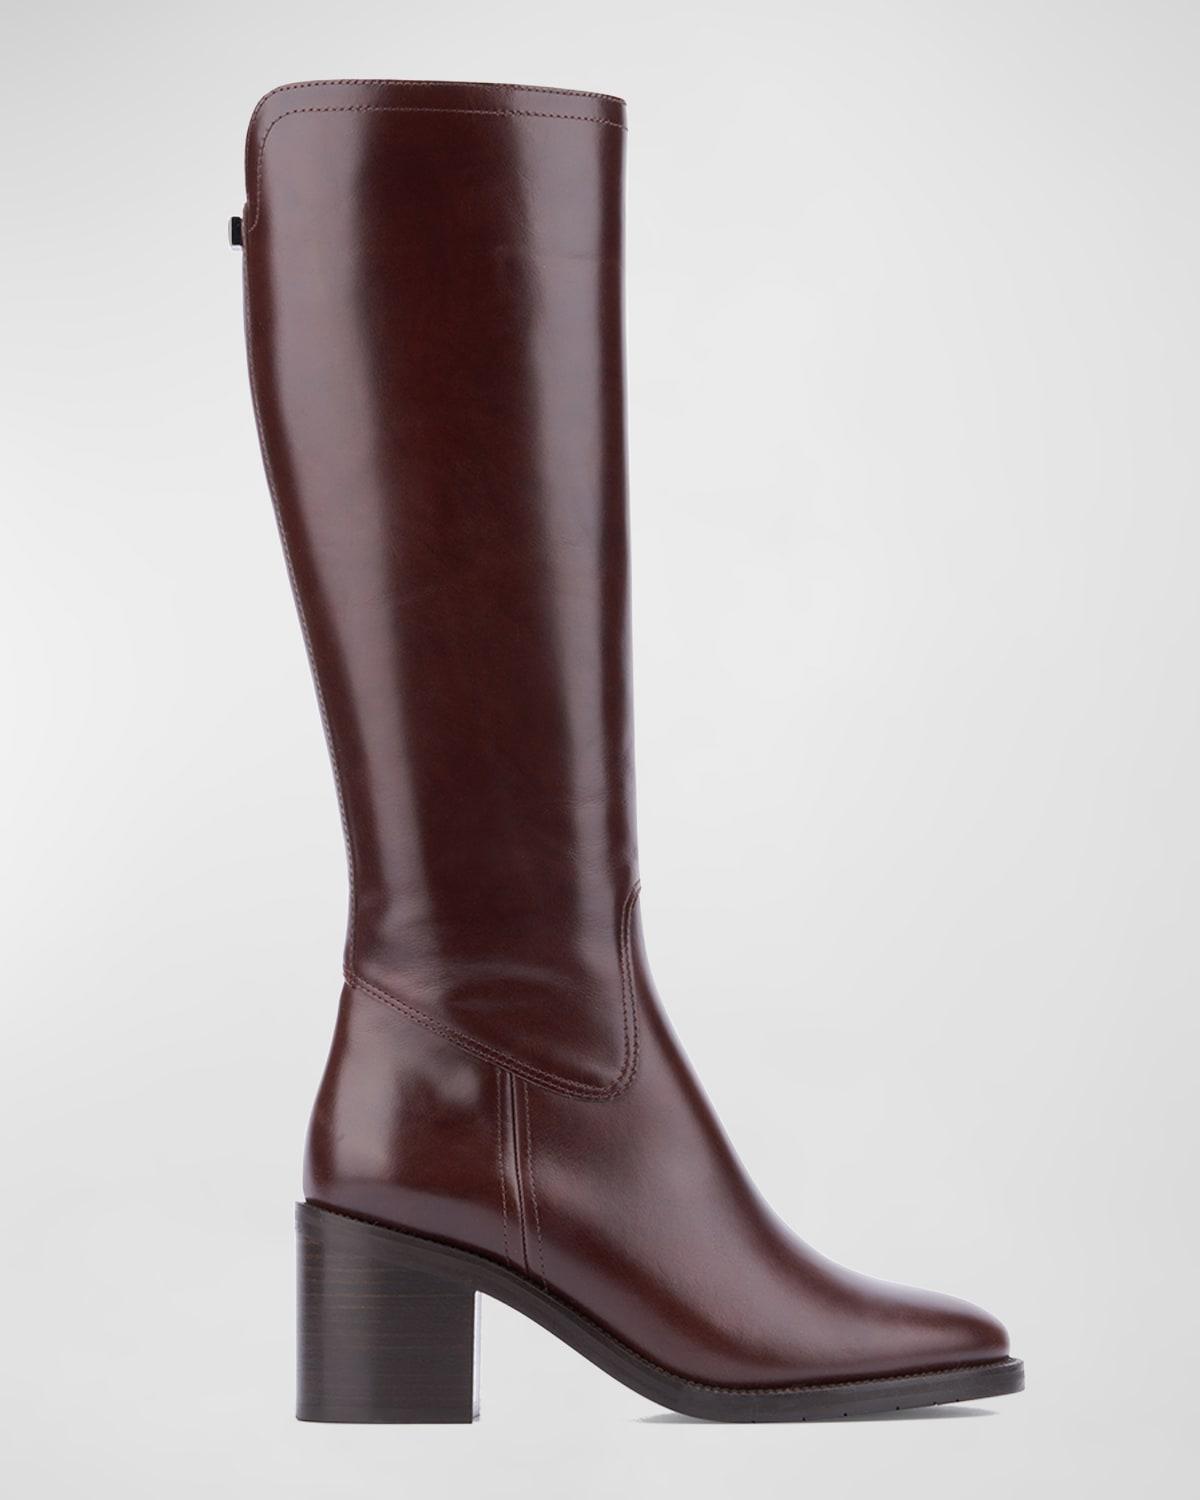 Aquatalia Josephina Leather Riding Boots in Brown | Lyst